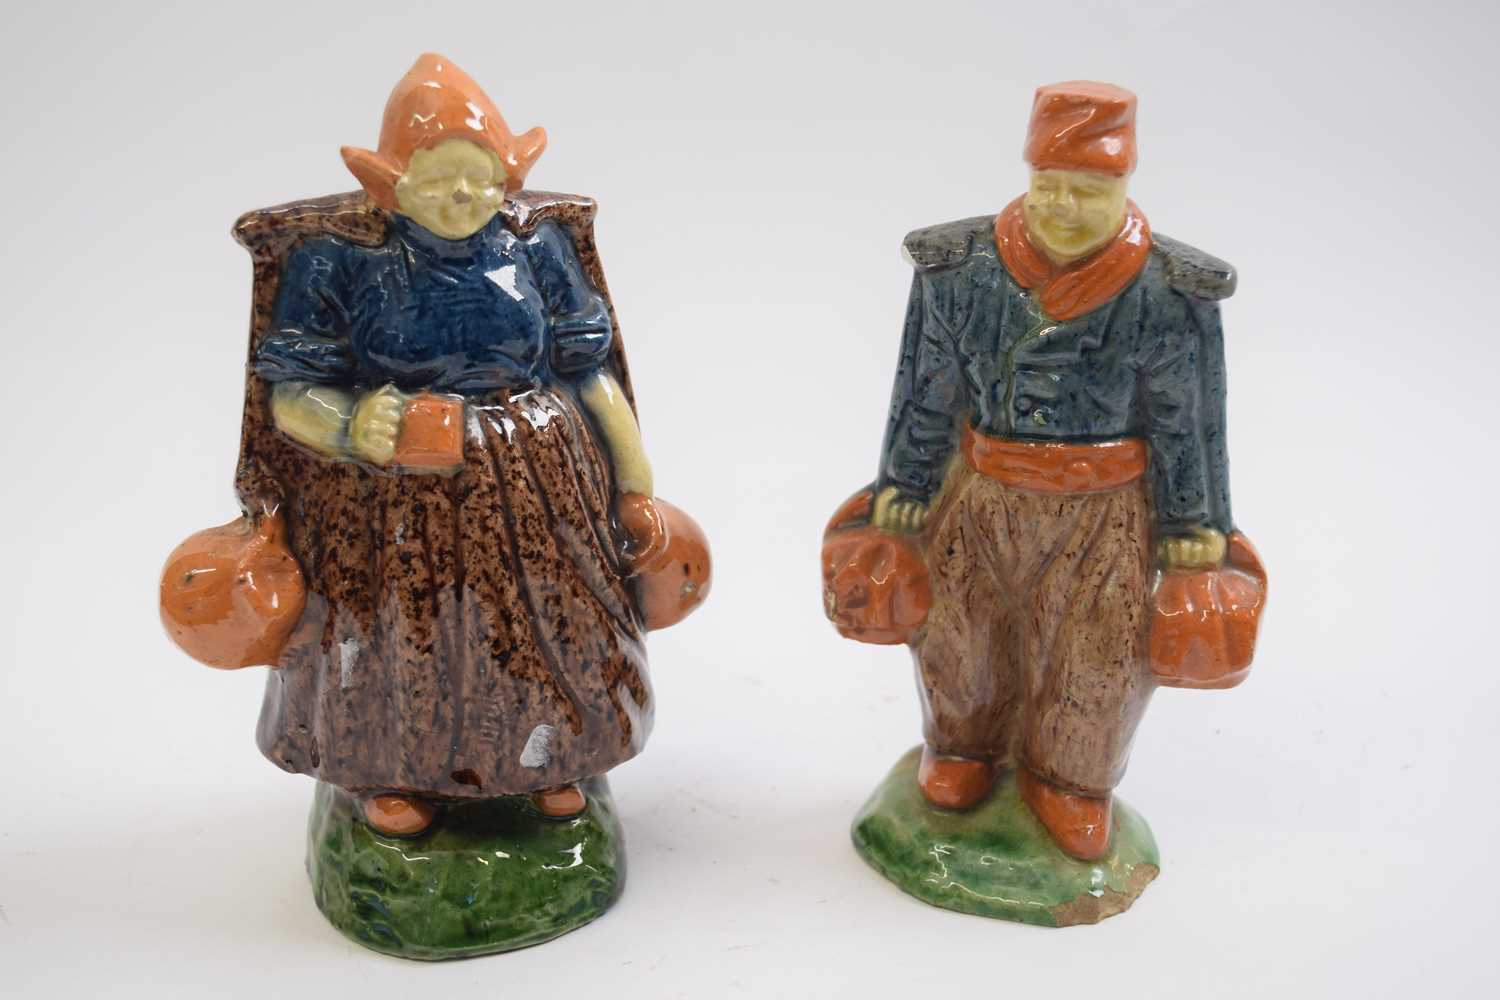 Pair of early 20th Century Dutch pottery figures of a boy and a girl in Maiolica style glazes